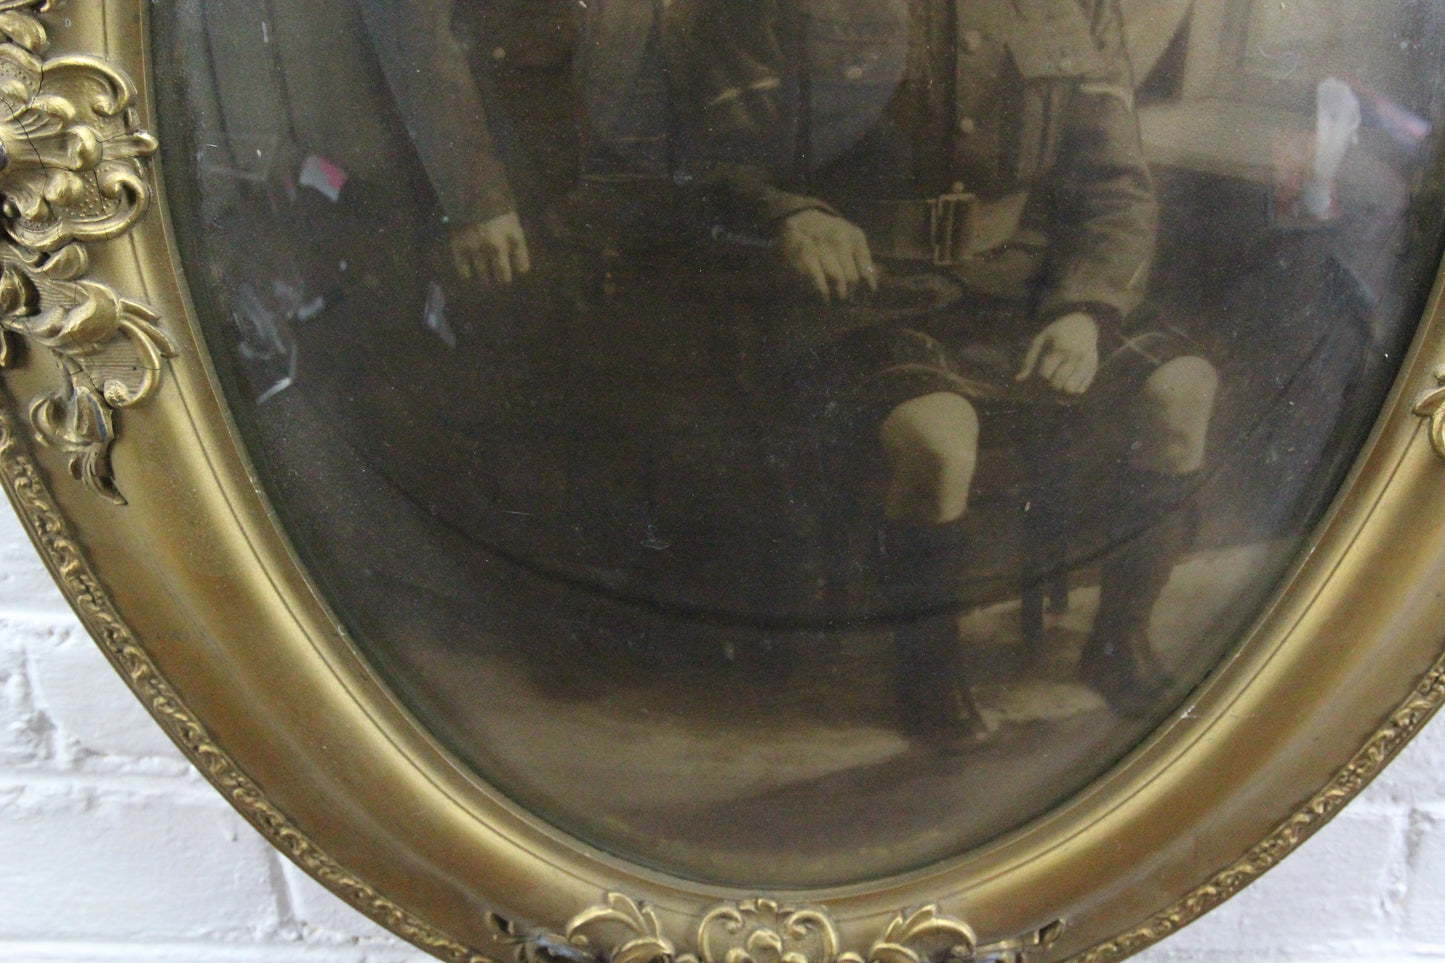 Portrait Photograph of Two Scottish Soldiers in Bubble Frame - 18.5" x 24.5"